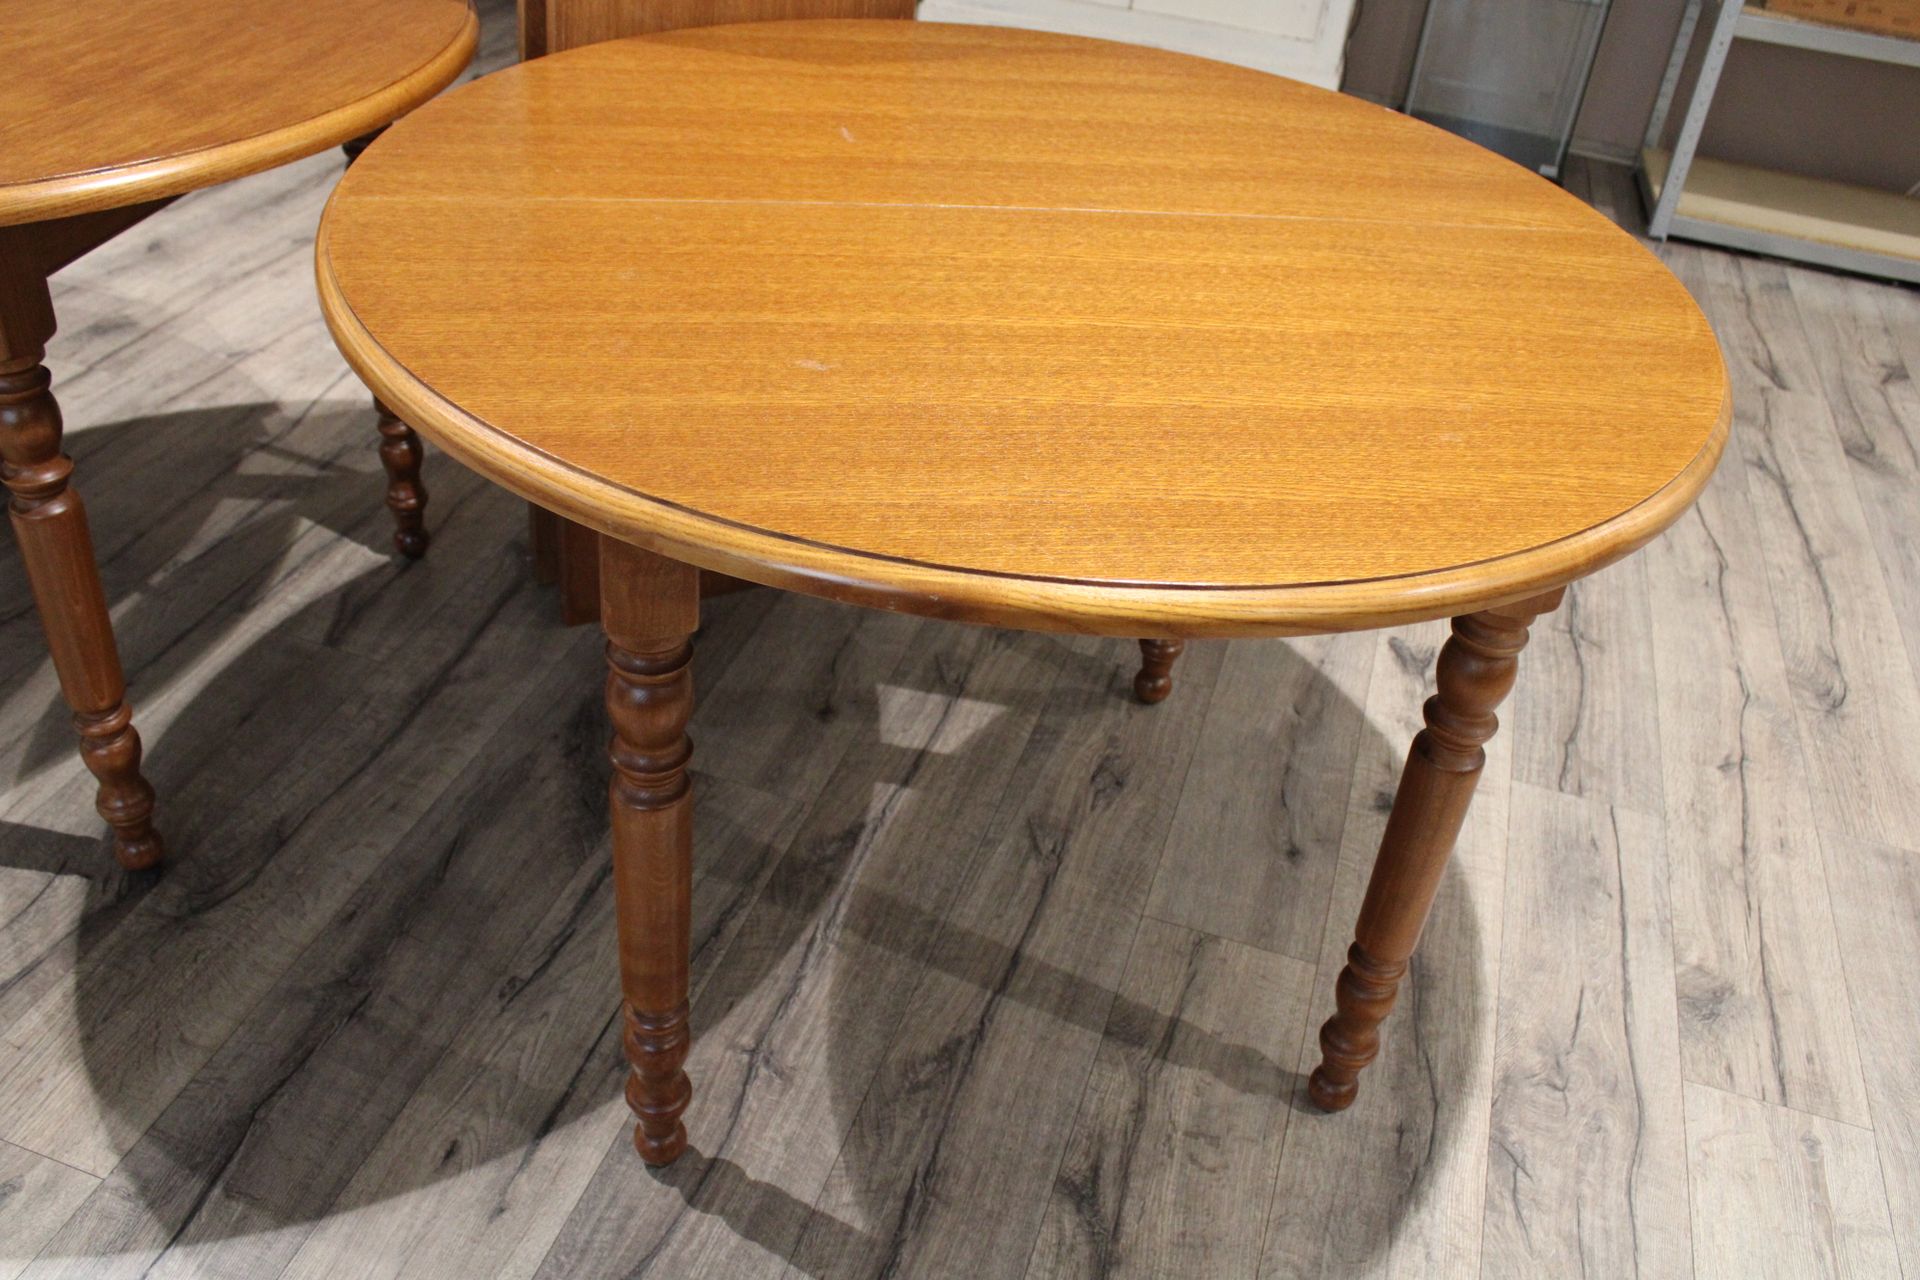 Null Three round tables (118 cm diameter, 75 cm height) with double extension.